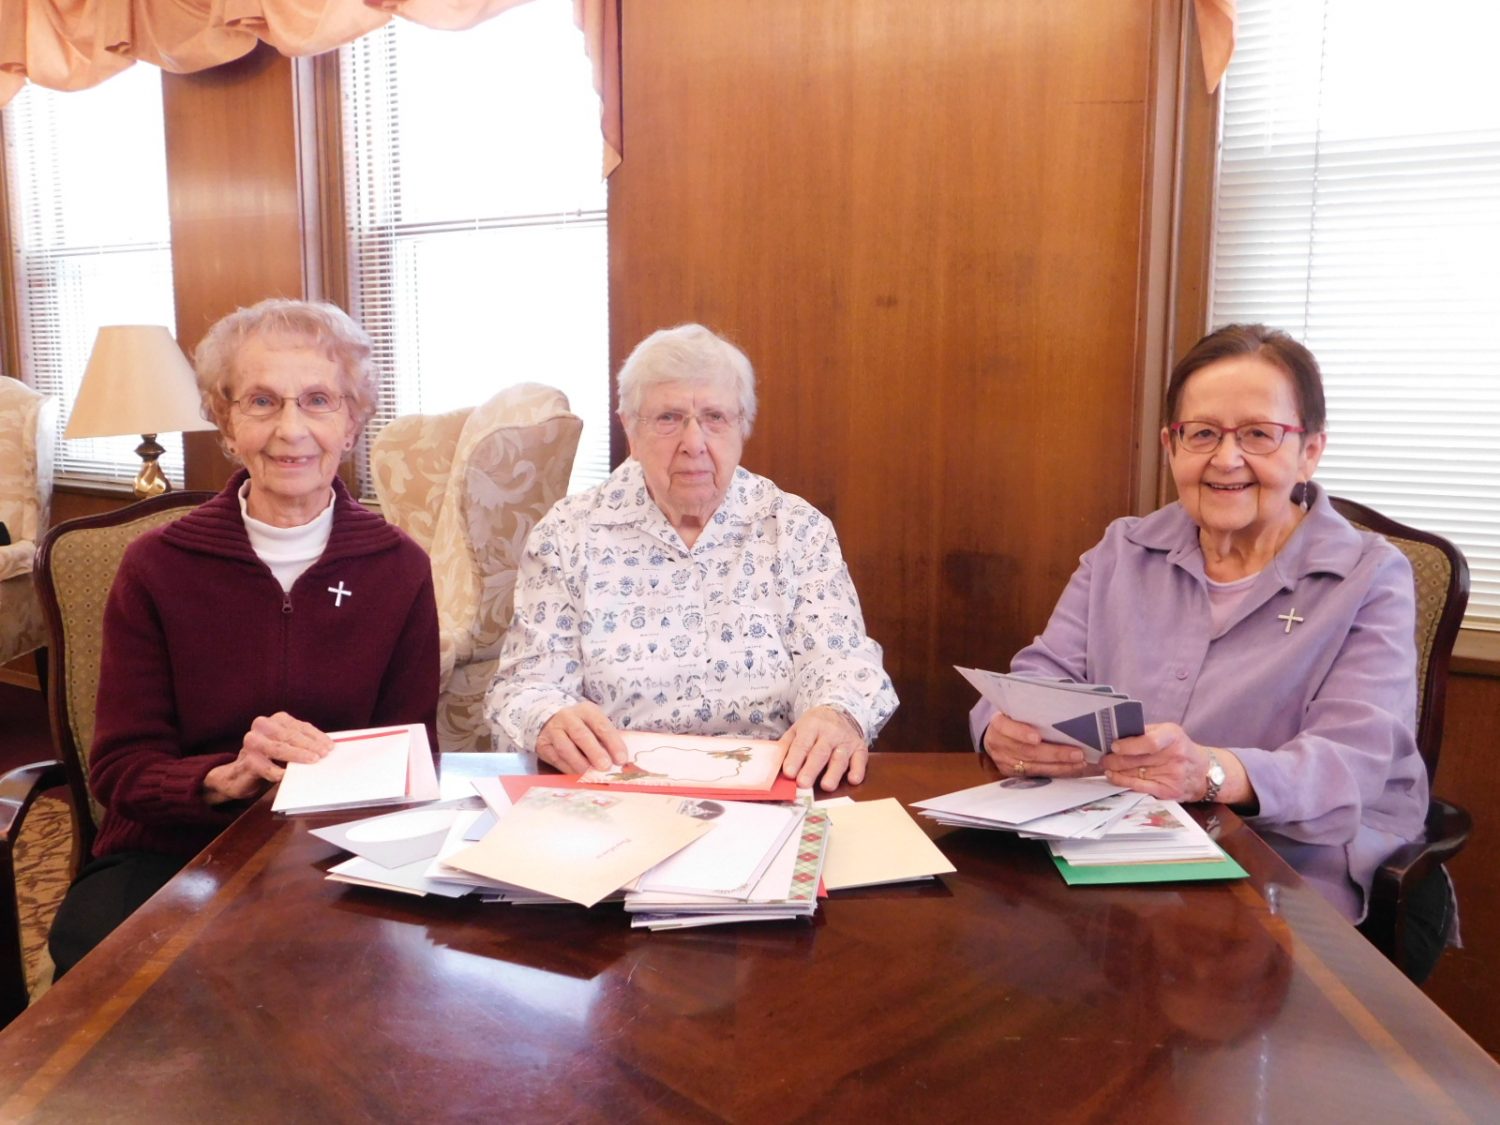 Holy Cross Sisters send Christmas greetings to Copper Lake/Lincoln Hills students